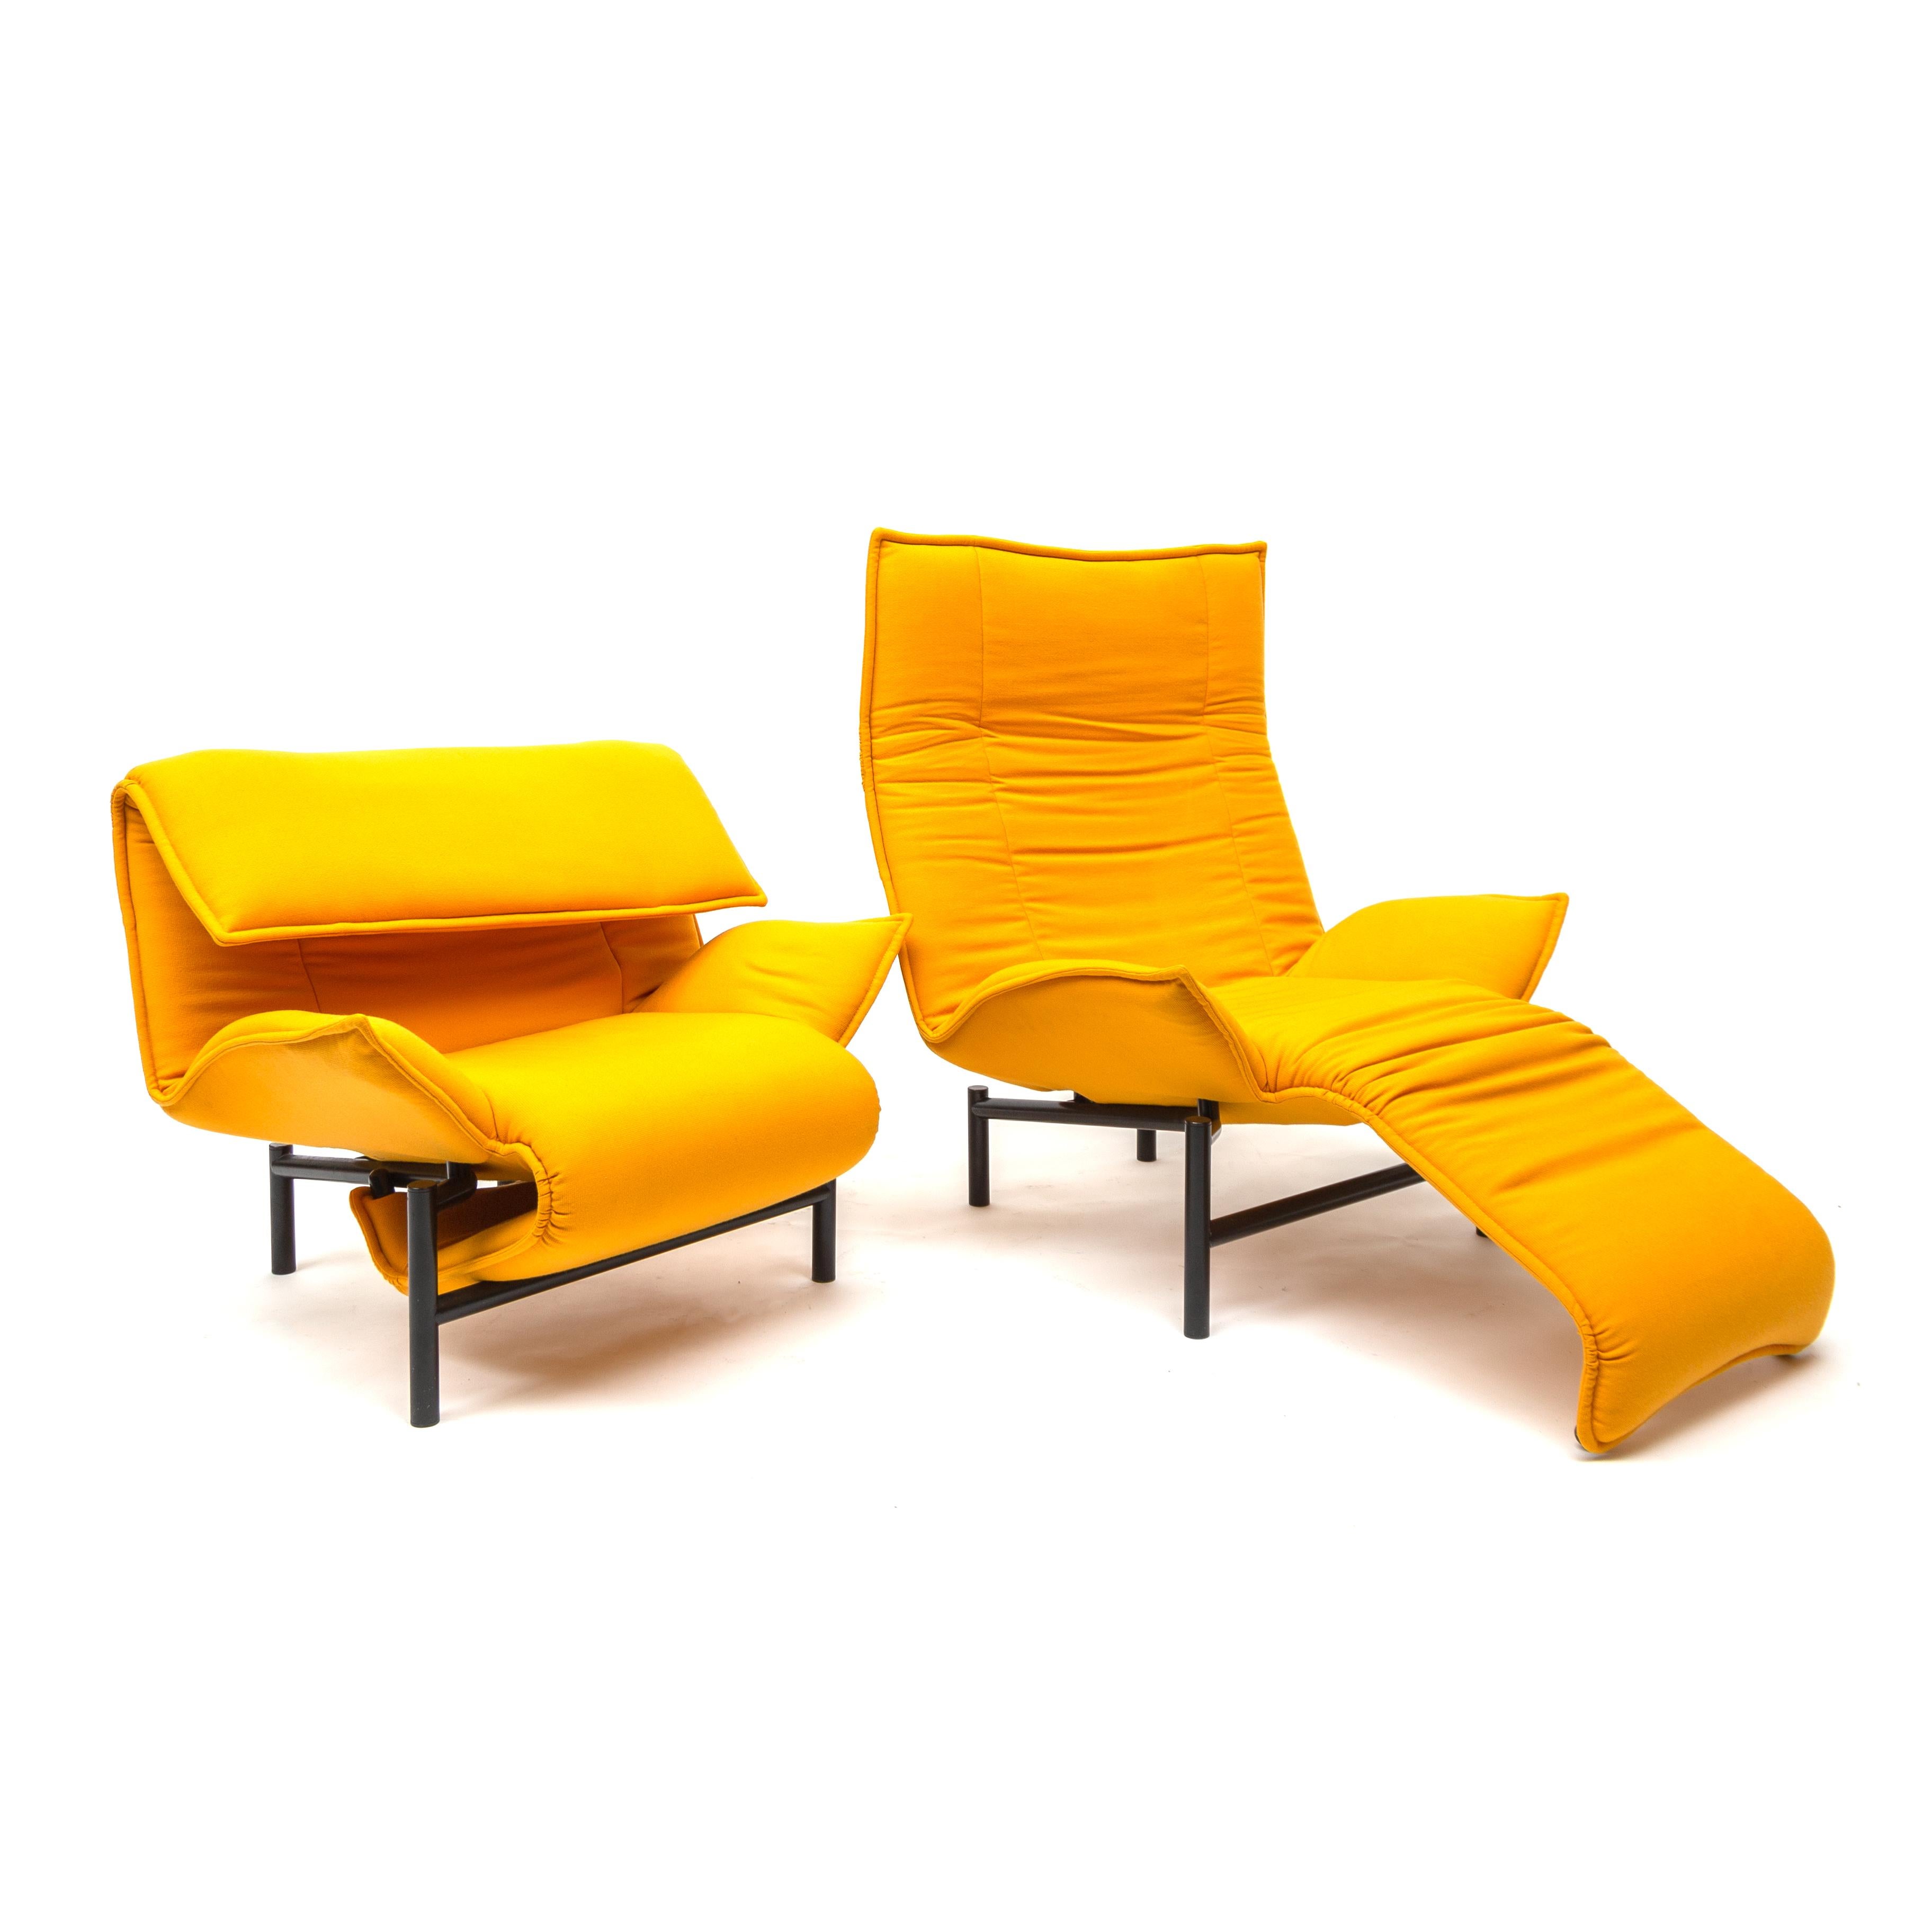 First conceived by Vico Magistretti in 1983 for Cassina, the exuberant Veranda lounge chair offers comfort and flexibility. The inner steel frame adjusts to reconfigure the chair. The seat can tilt back and fold up or down to change the height of